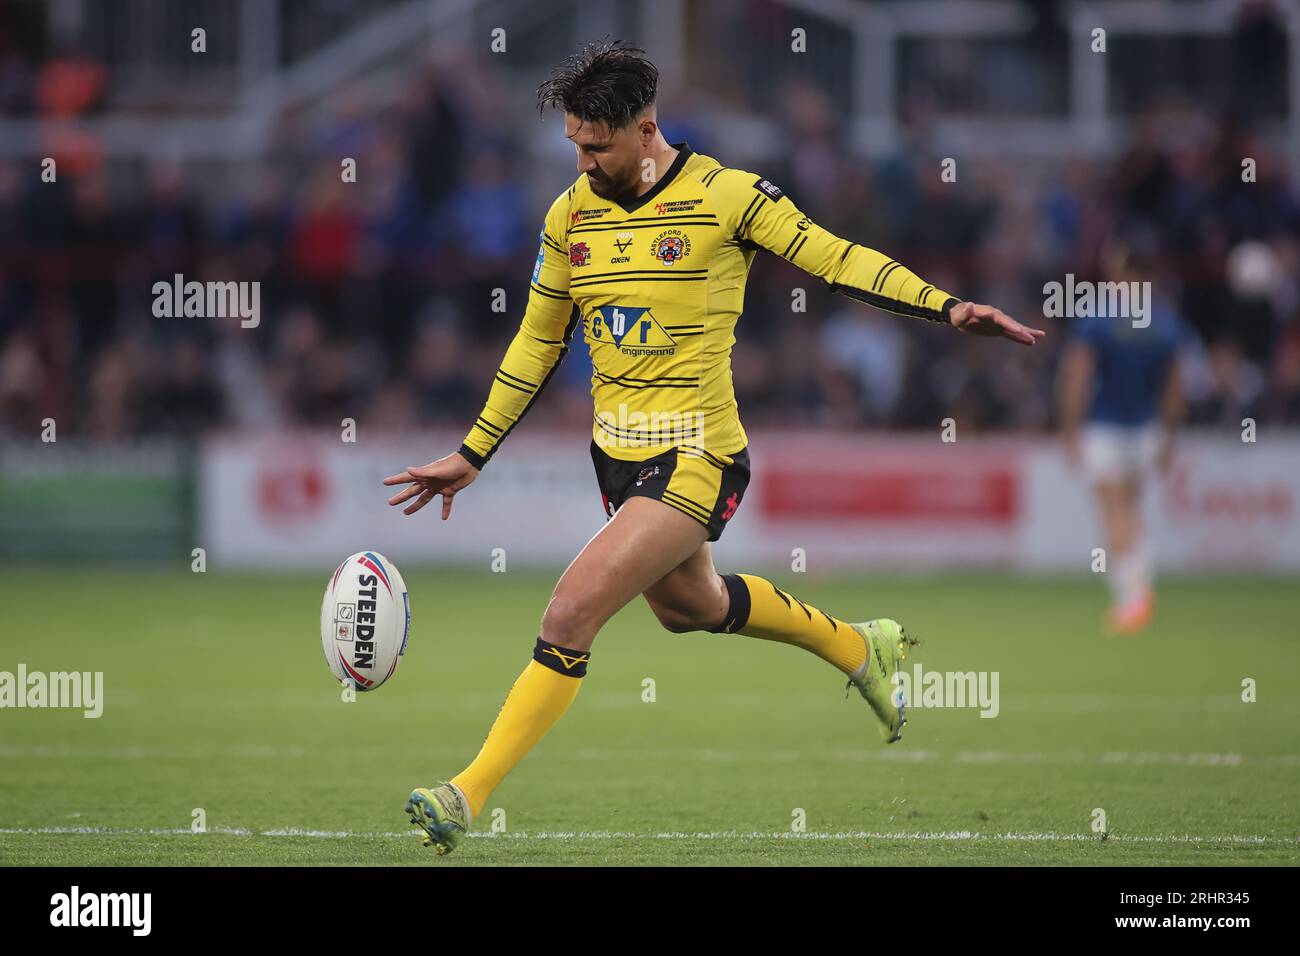 Wakefield, Royaume-Uni. 18 août 2023. Be Well support Stadium, Wakefield, West Yorkshire, 18 août 2023. Betfred Super League Wakefield Trinity vs Castleford Tigers Gareth Widdop de Castleford Tigers crédit : Touchlinepics/Alamy Live News Banque D'Images